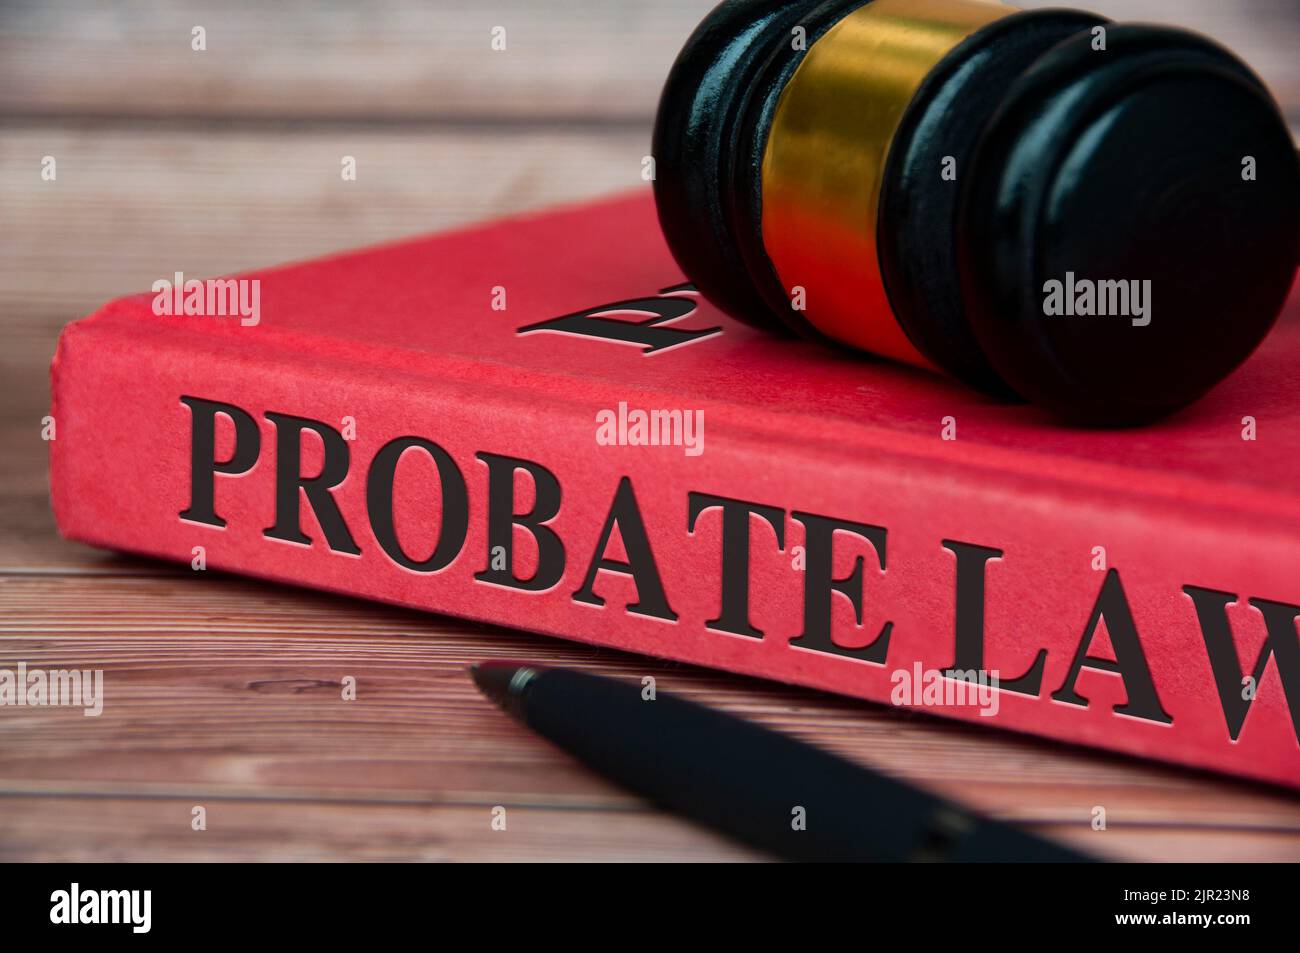 Probate law book with gavel on top. Legal and law concept. Stock Photo